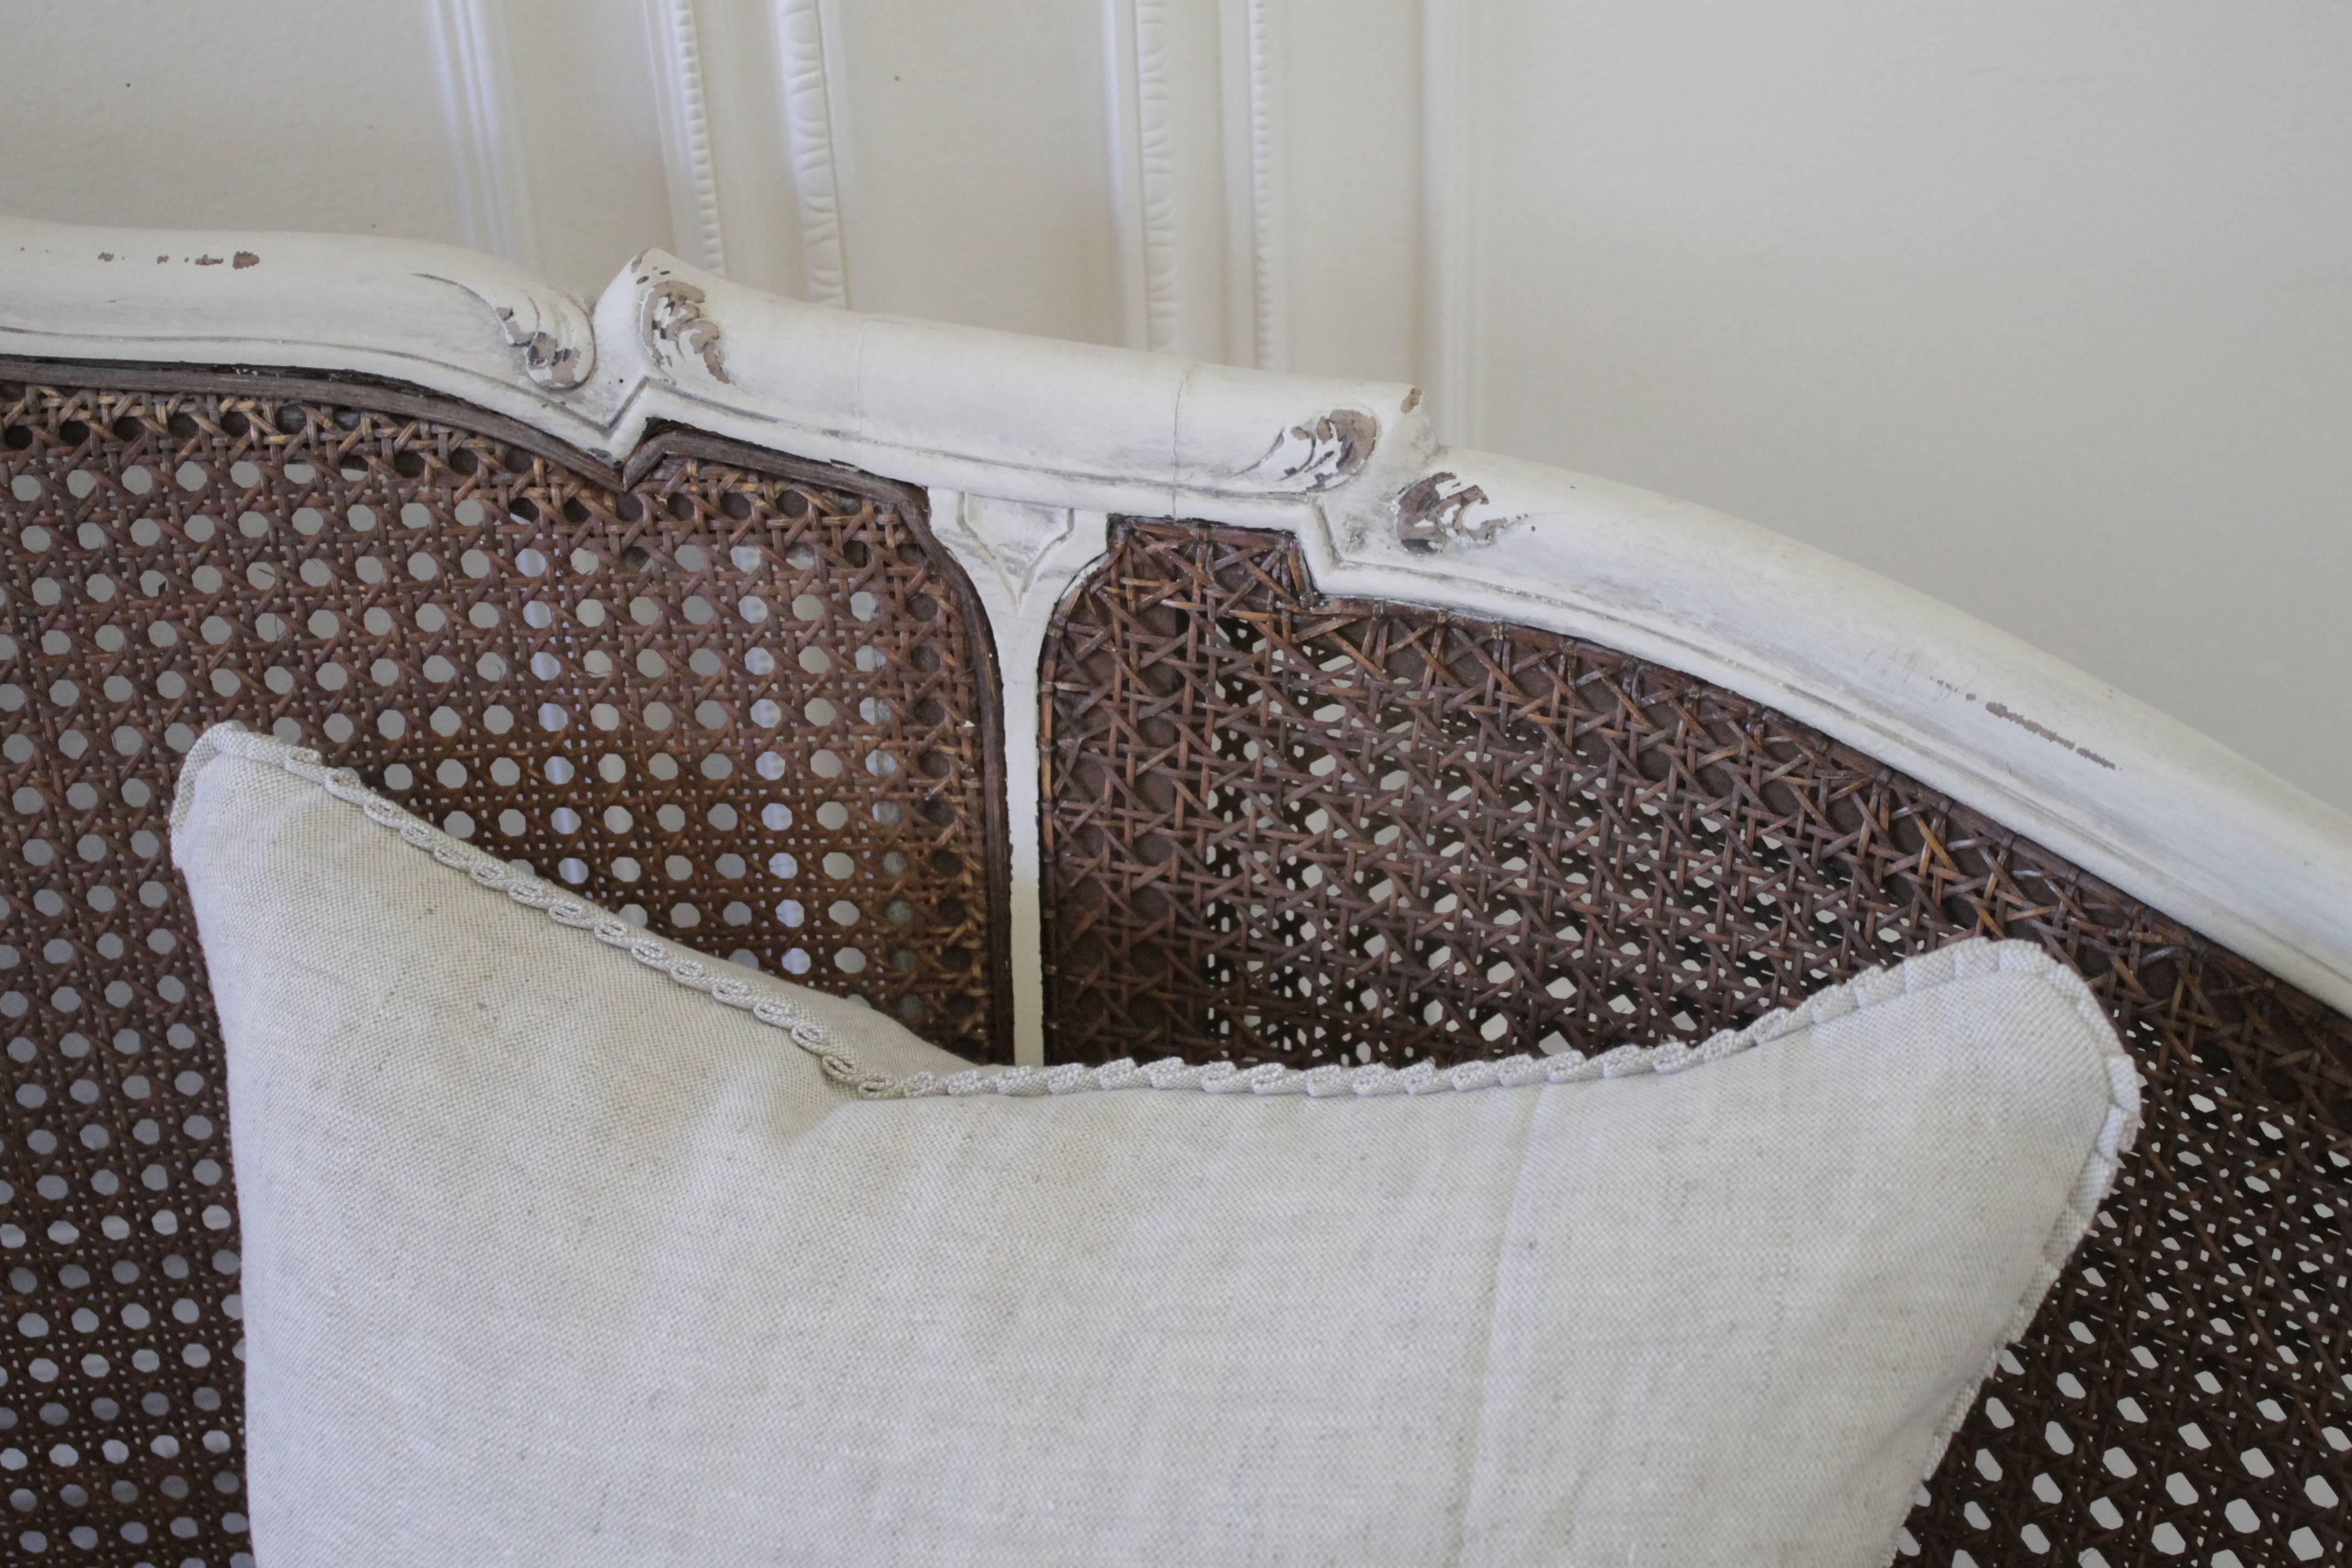 french cane settee